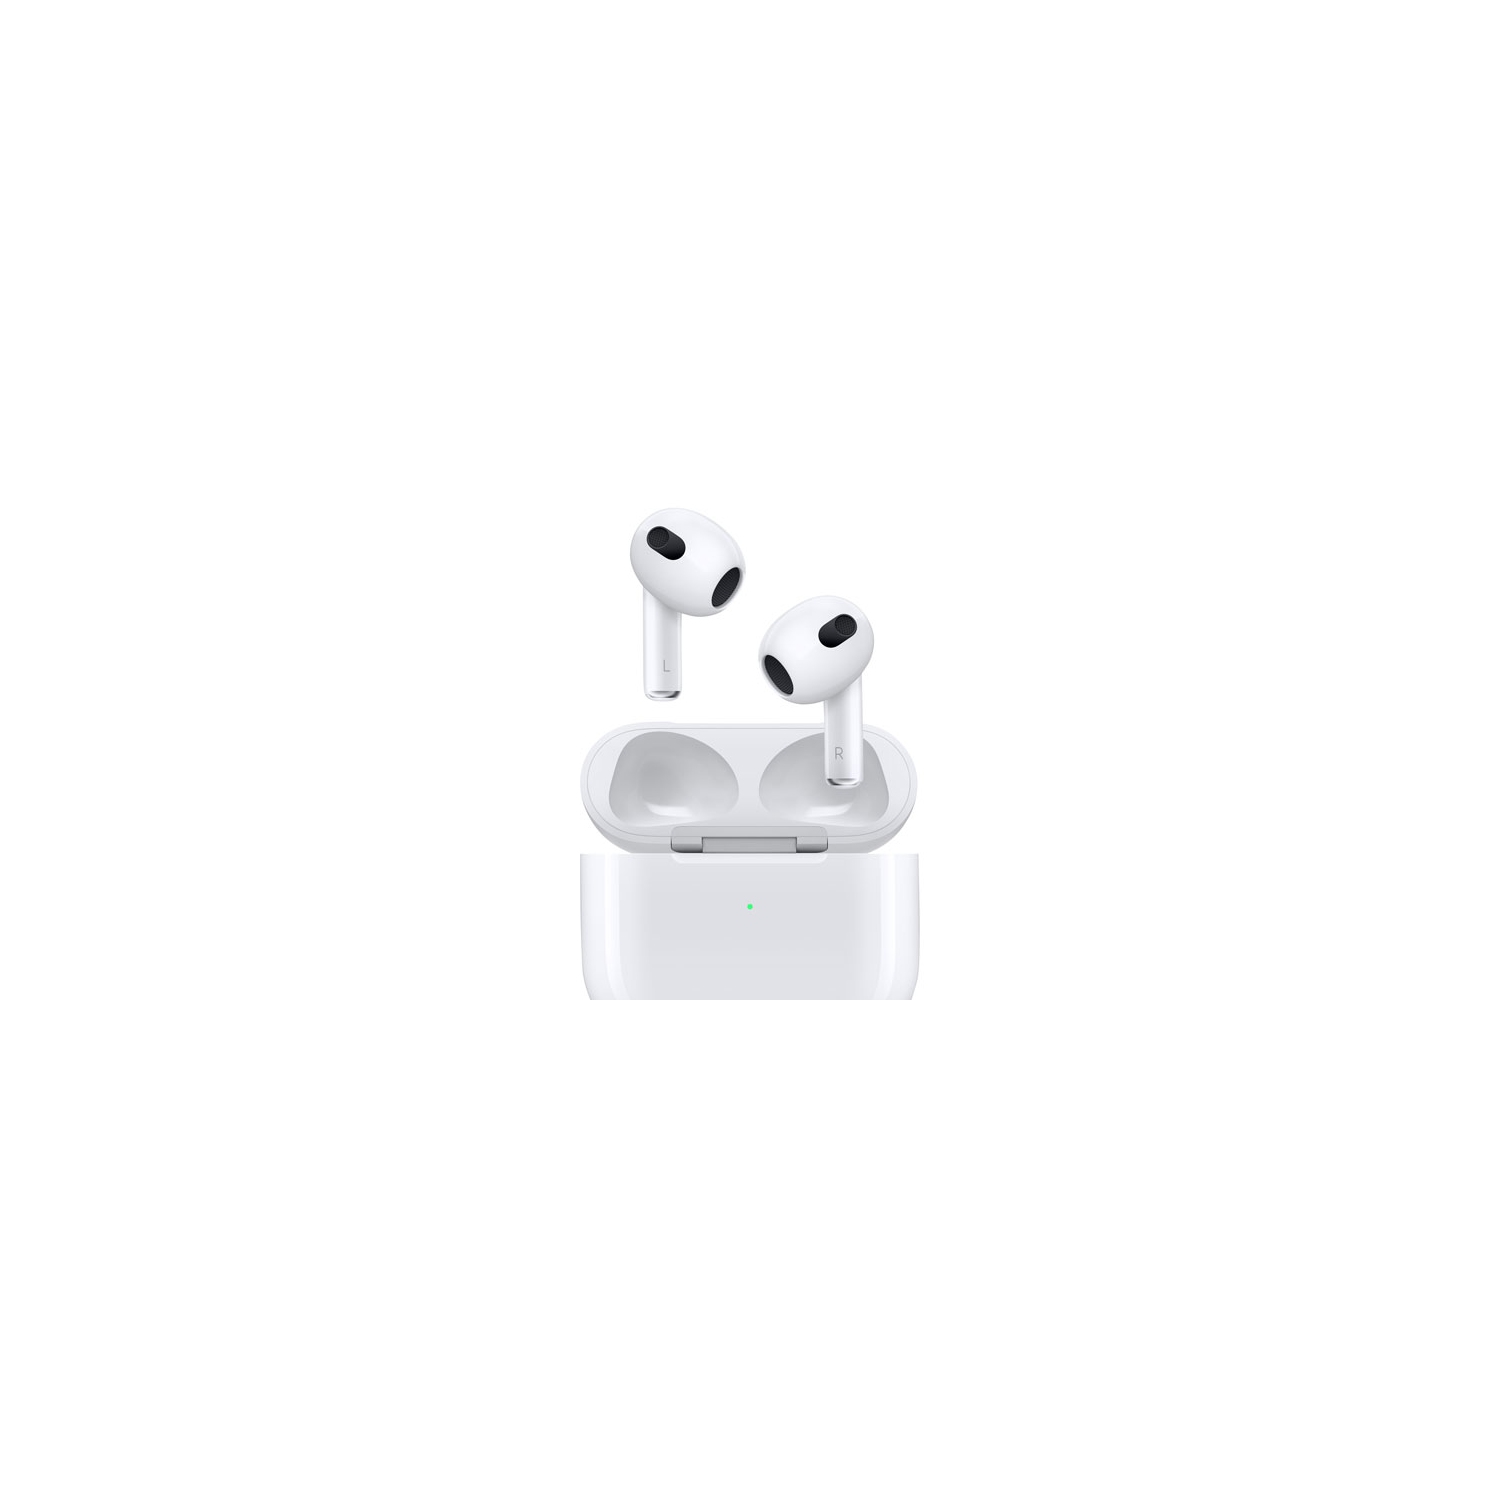 Open Box - Apple AirPods (3rd generation) In-Ear True Wireless Earbuds with Lightning Charging Case - White